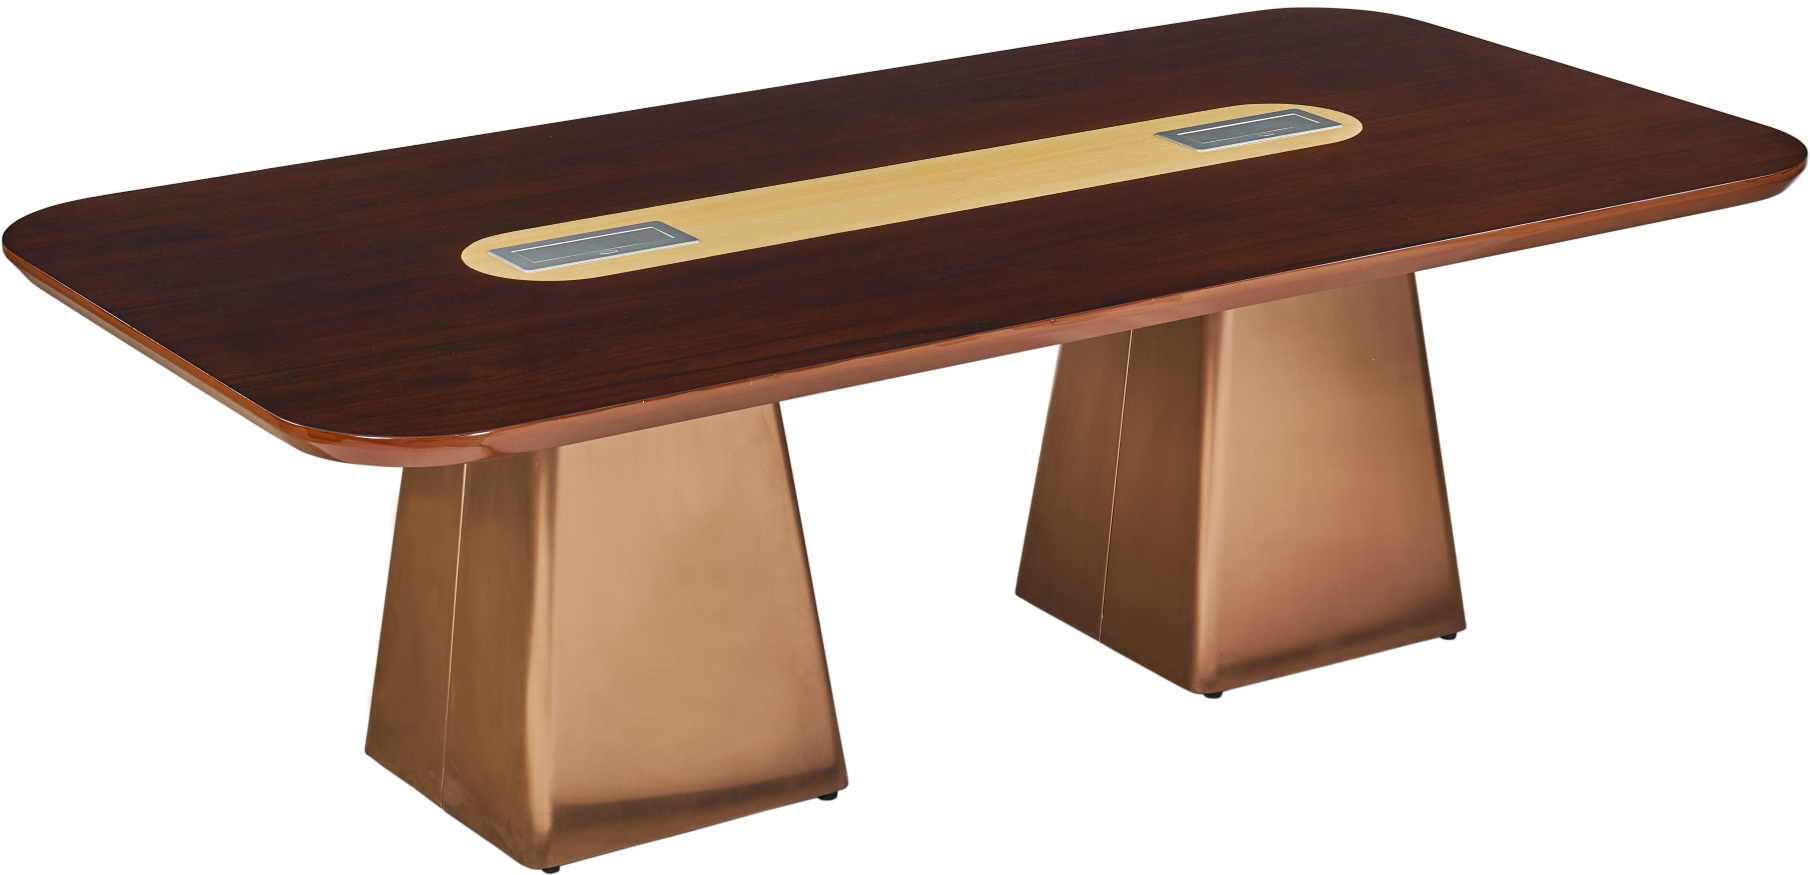 CONFERENCE 18 - Conference Table